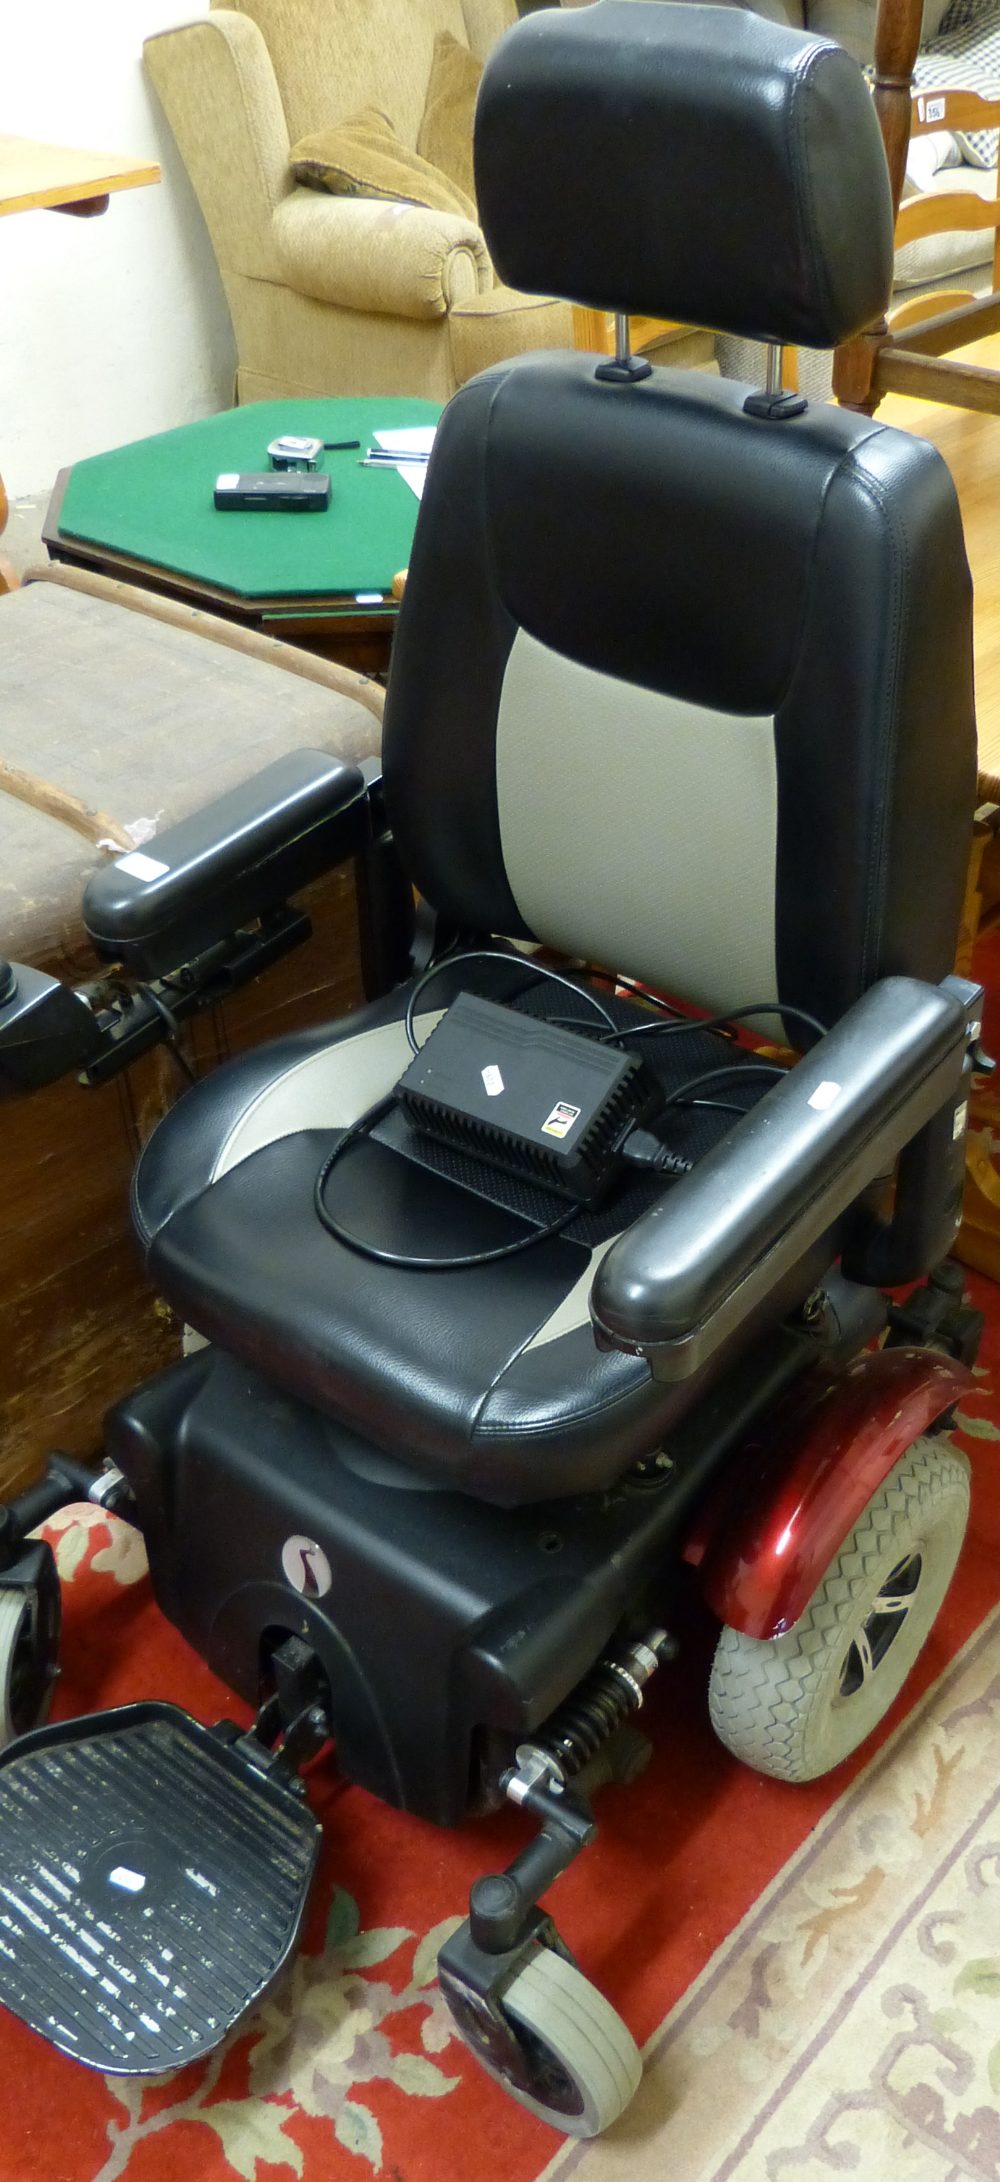 A powered wheelchair from Beechwood mobility together with charger, in good working order